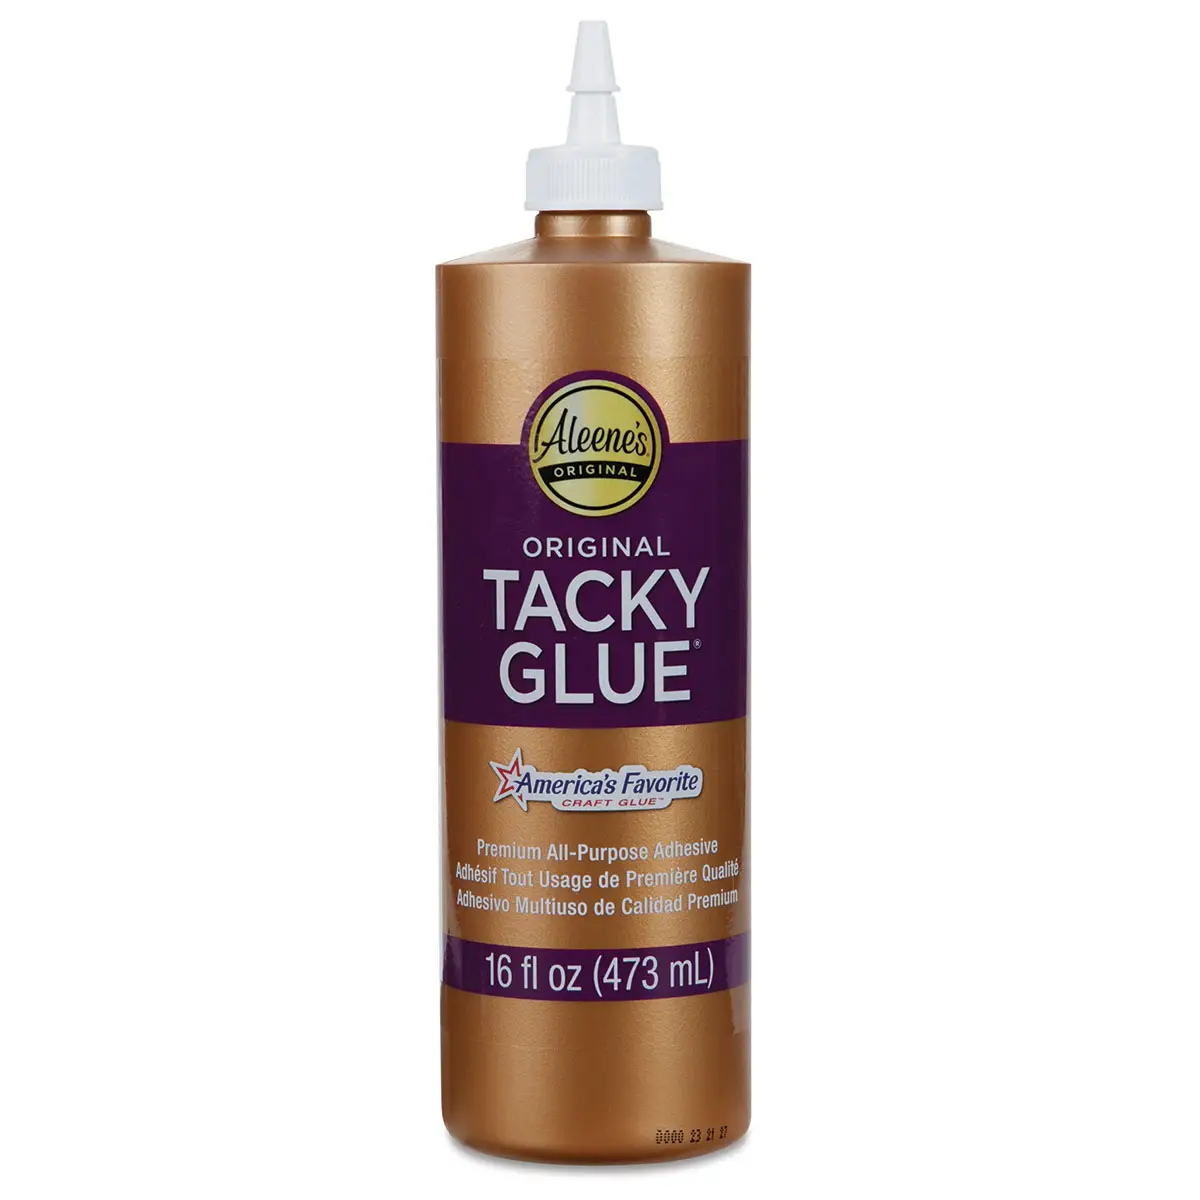 What Is A Tacky Glue